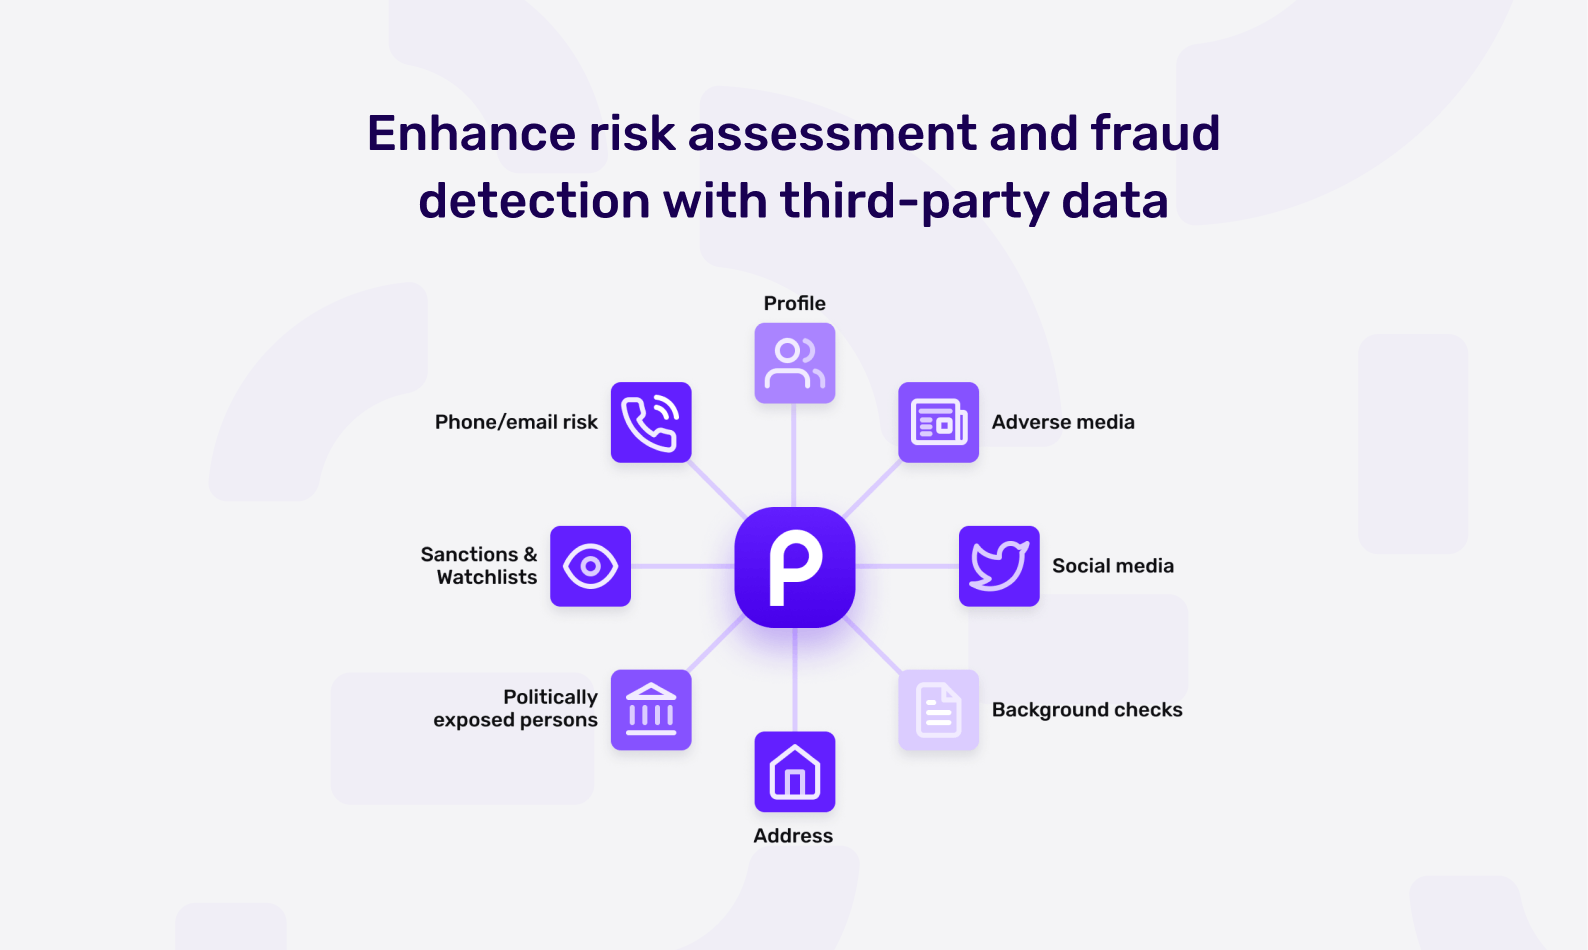 Enhance your risk assessment with additional data like email risk, watchlist reports, adverse media reports, and more.